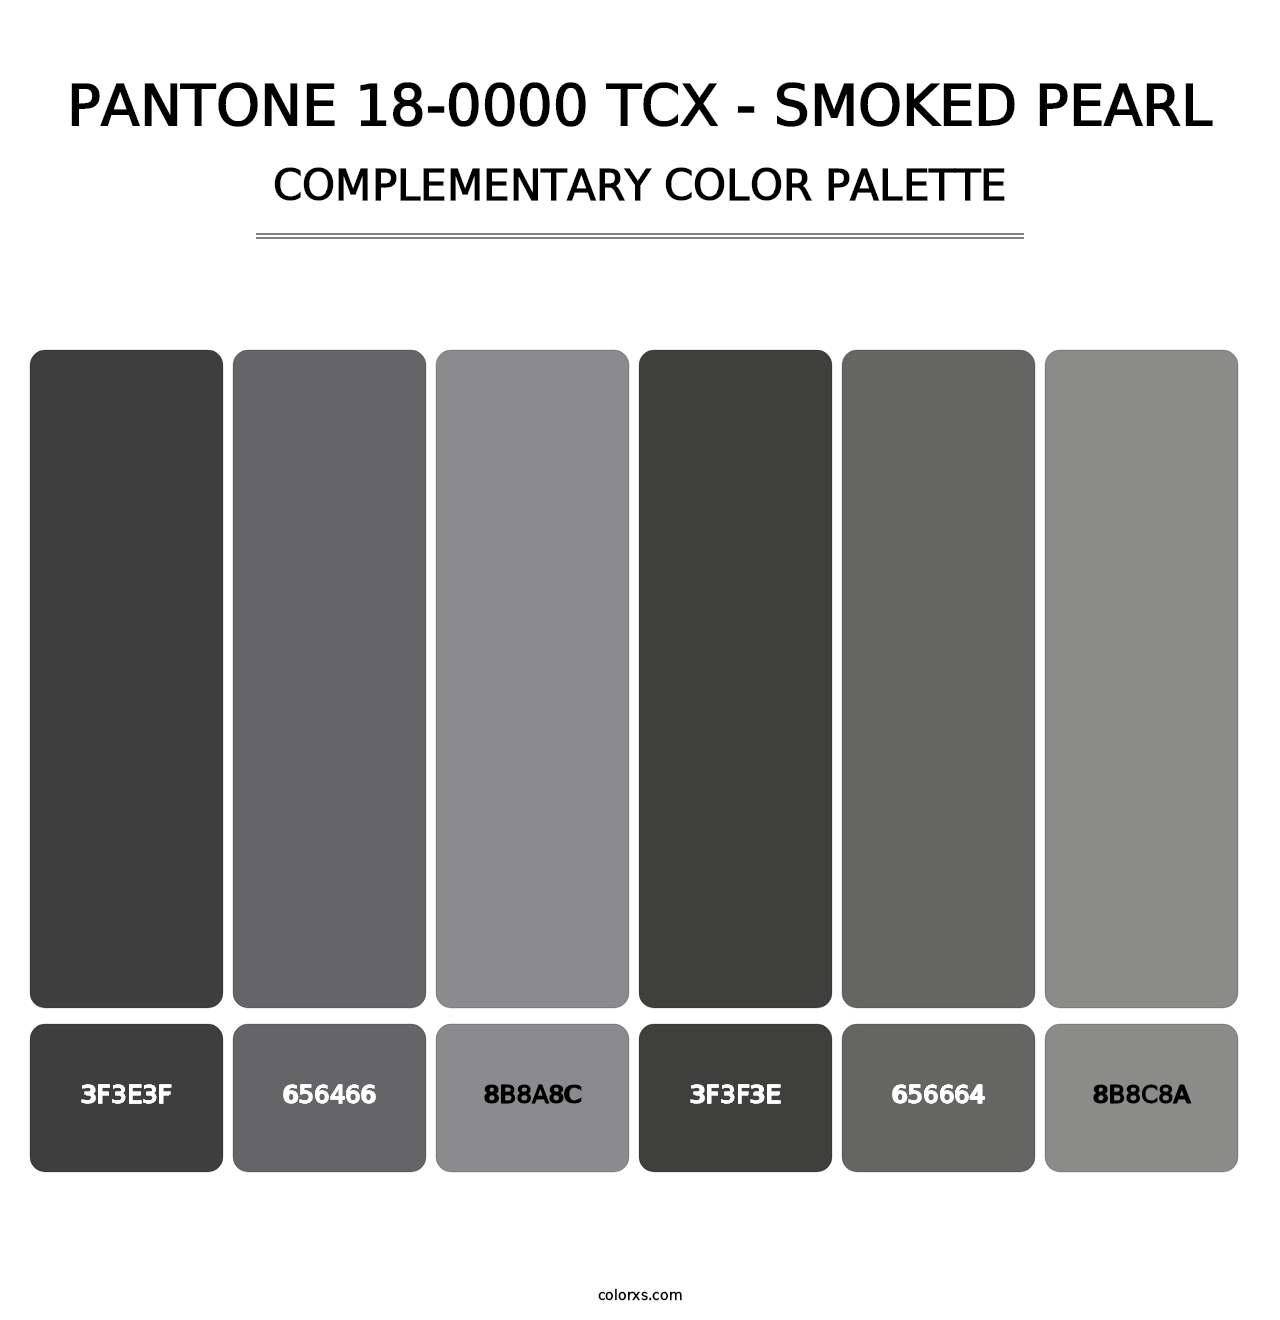 PANTONE 18-0000 TCX - Smoked Pearl - Complementary Color Palette